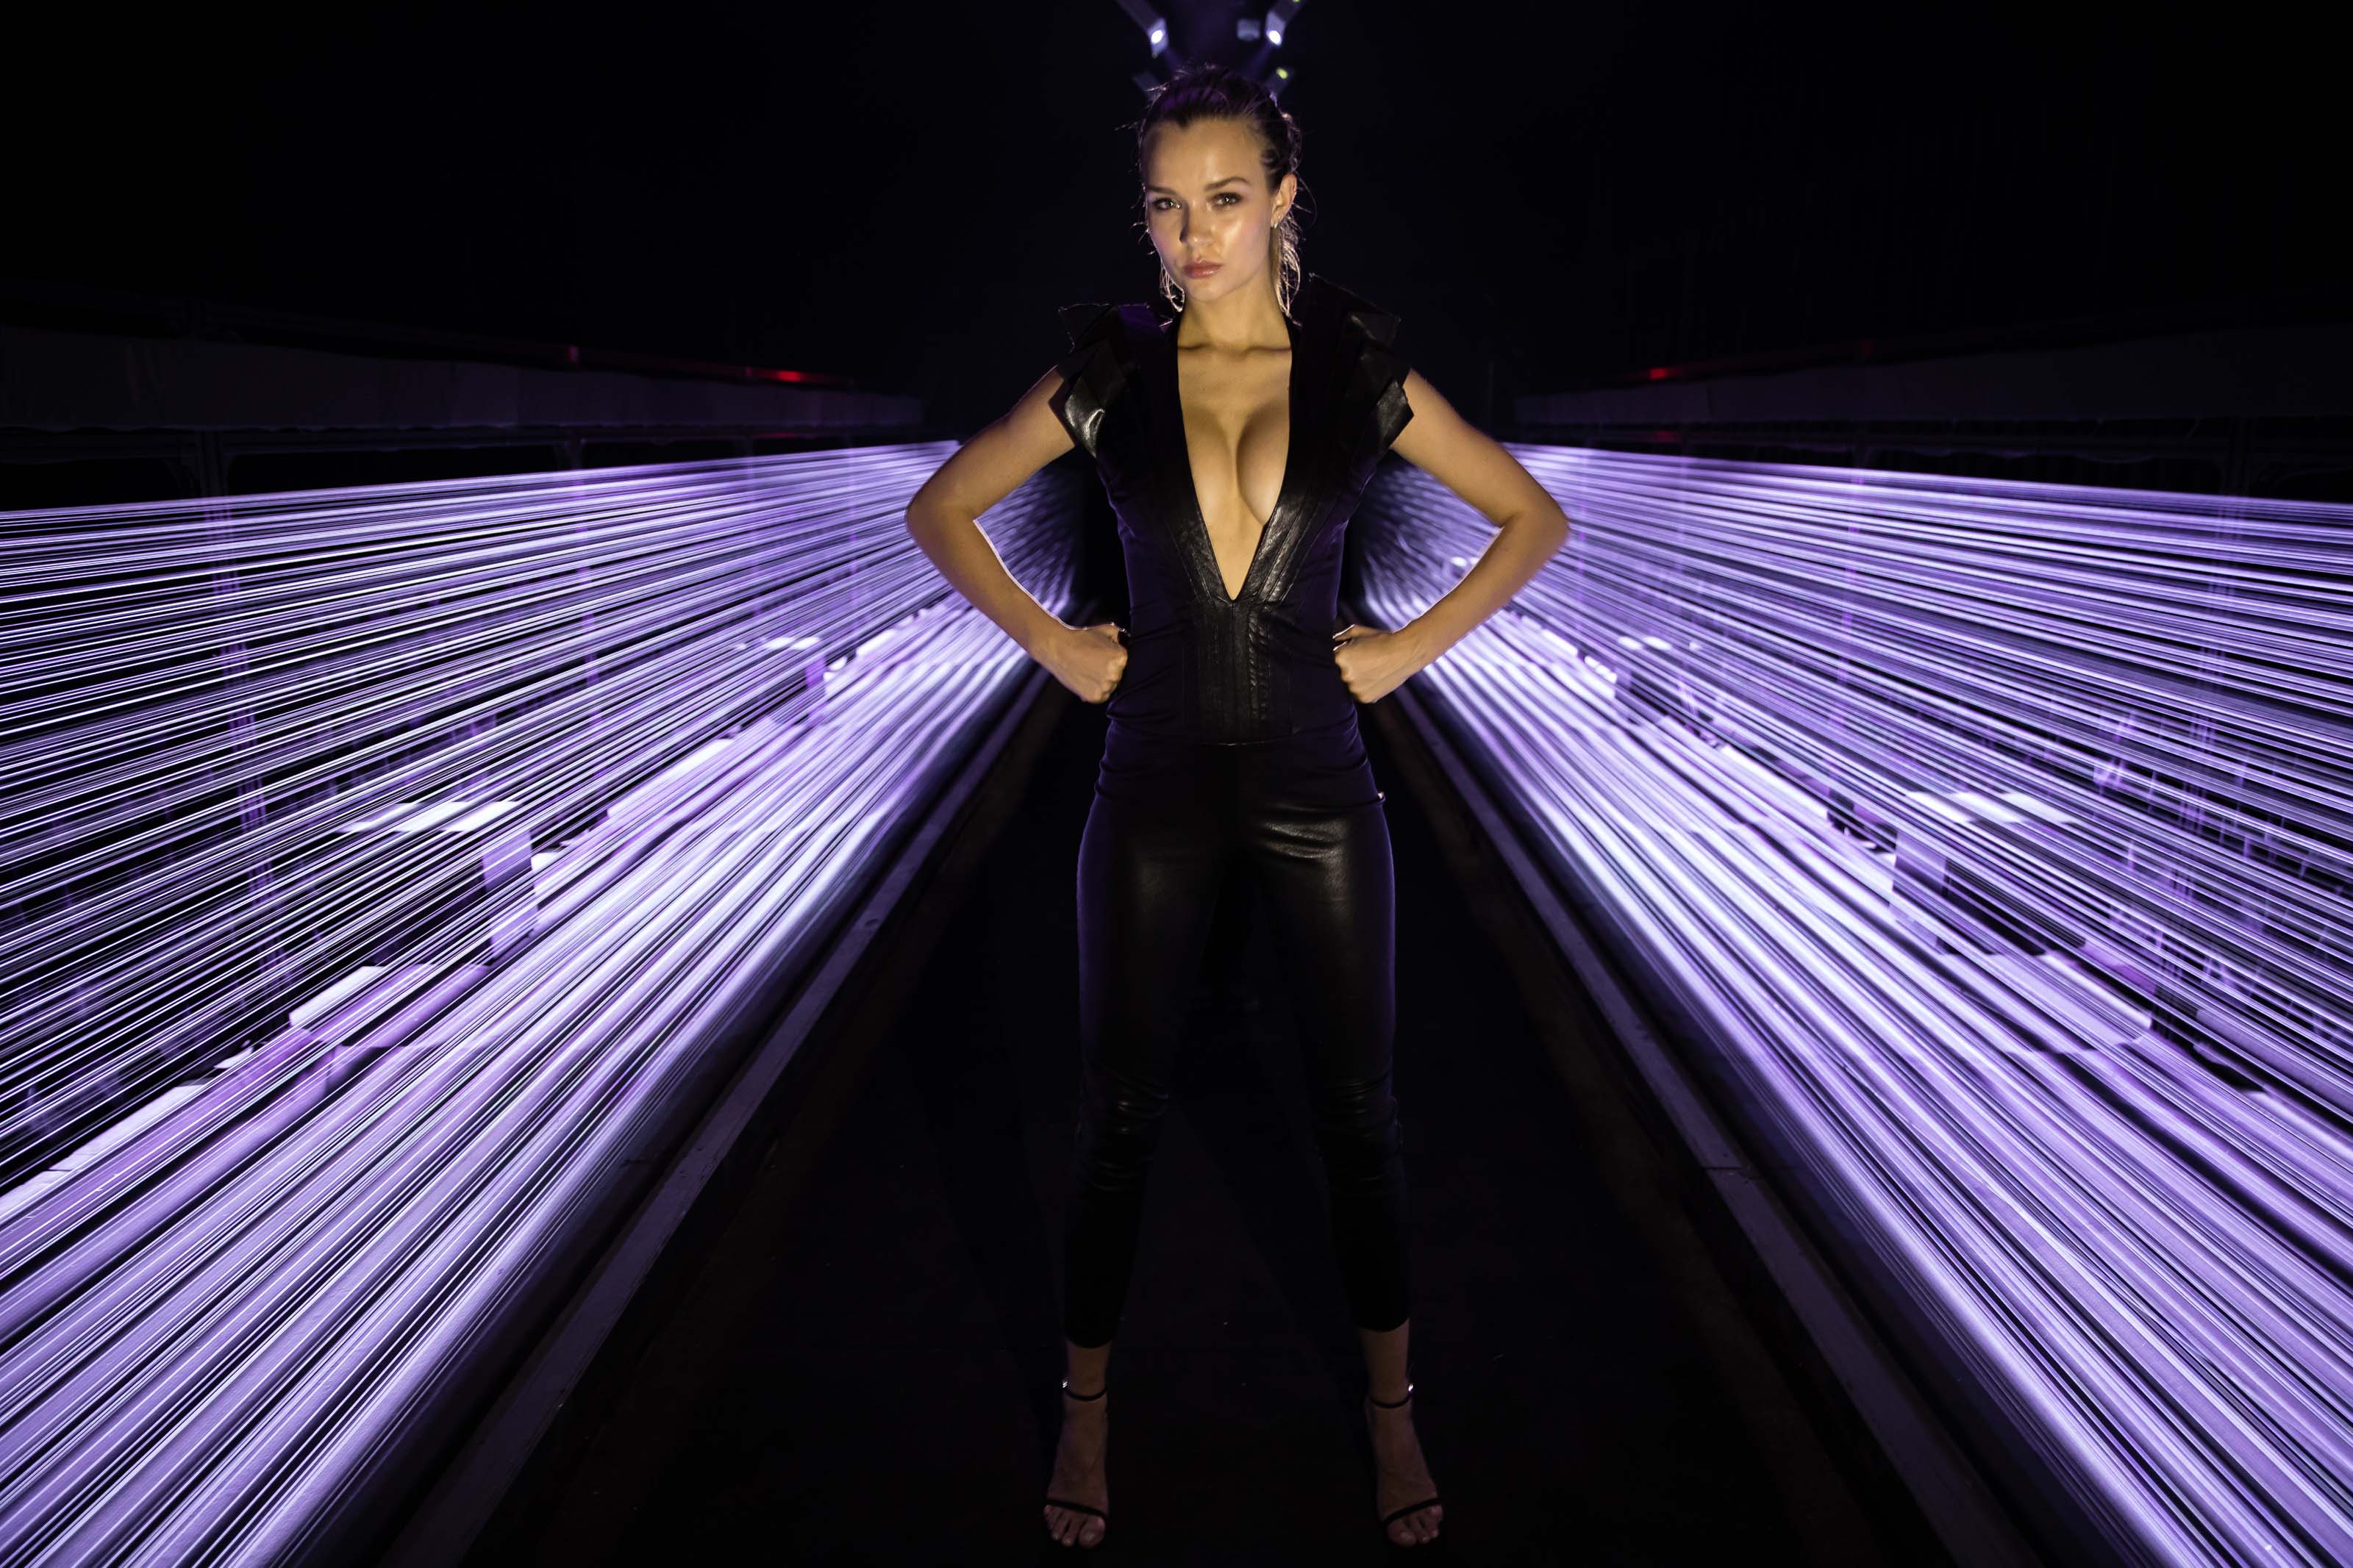 Josephine Skriver attends Acoustic Vessel ‘Odyessey’ Tunnel Sony`s #LostInMusic SXSW Festival